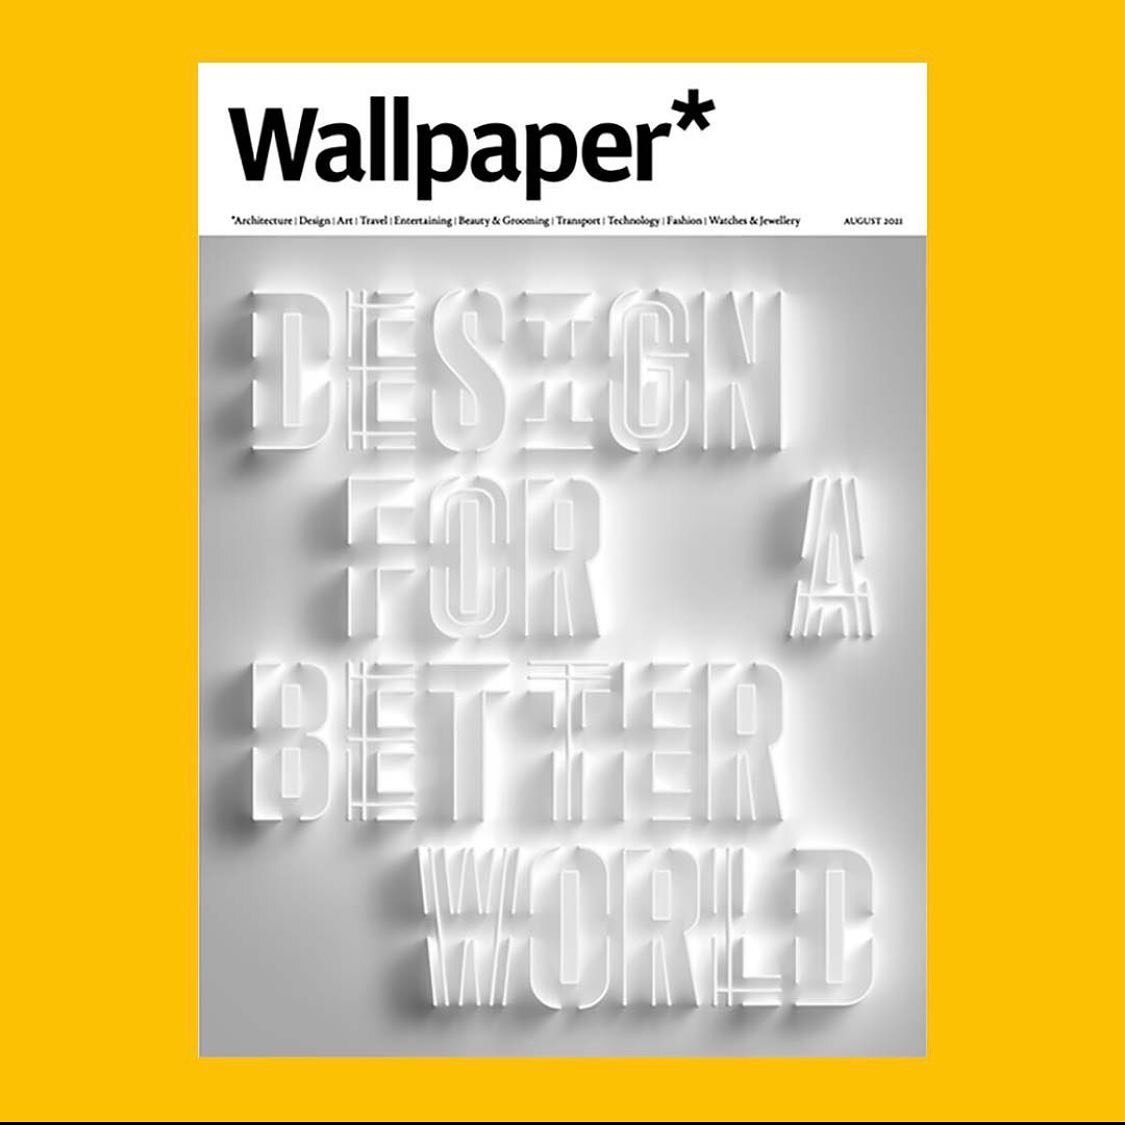 Finally we can reveal our collaboration with @victorinox and @butchersandbicycles for @wallpapermag Re-Made! 

Really proud to be part of this as @jenkinsuhnger and hopefully inspire people, start-ups and manufacturers to focus on quality and repair 